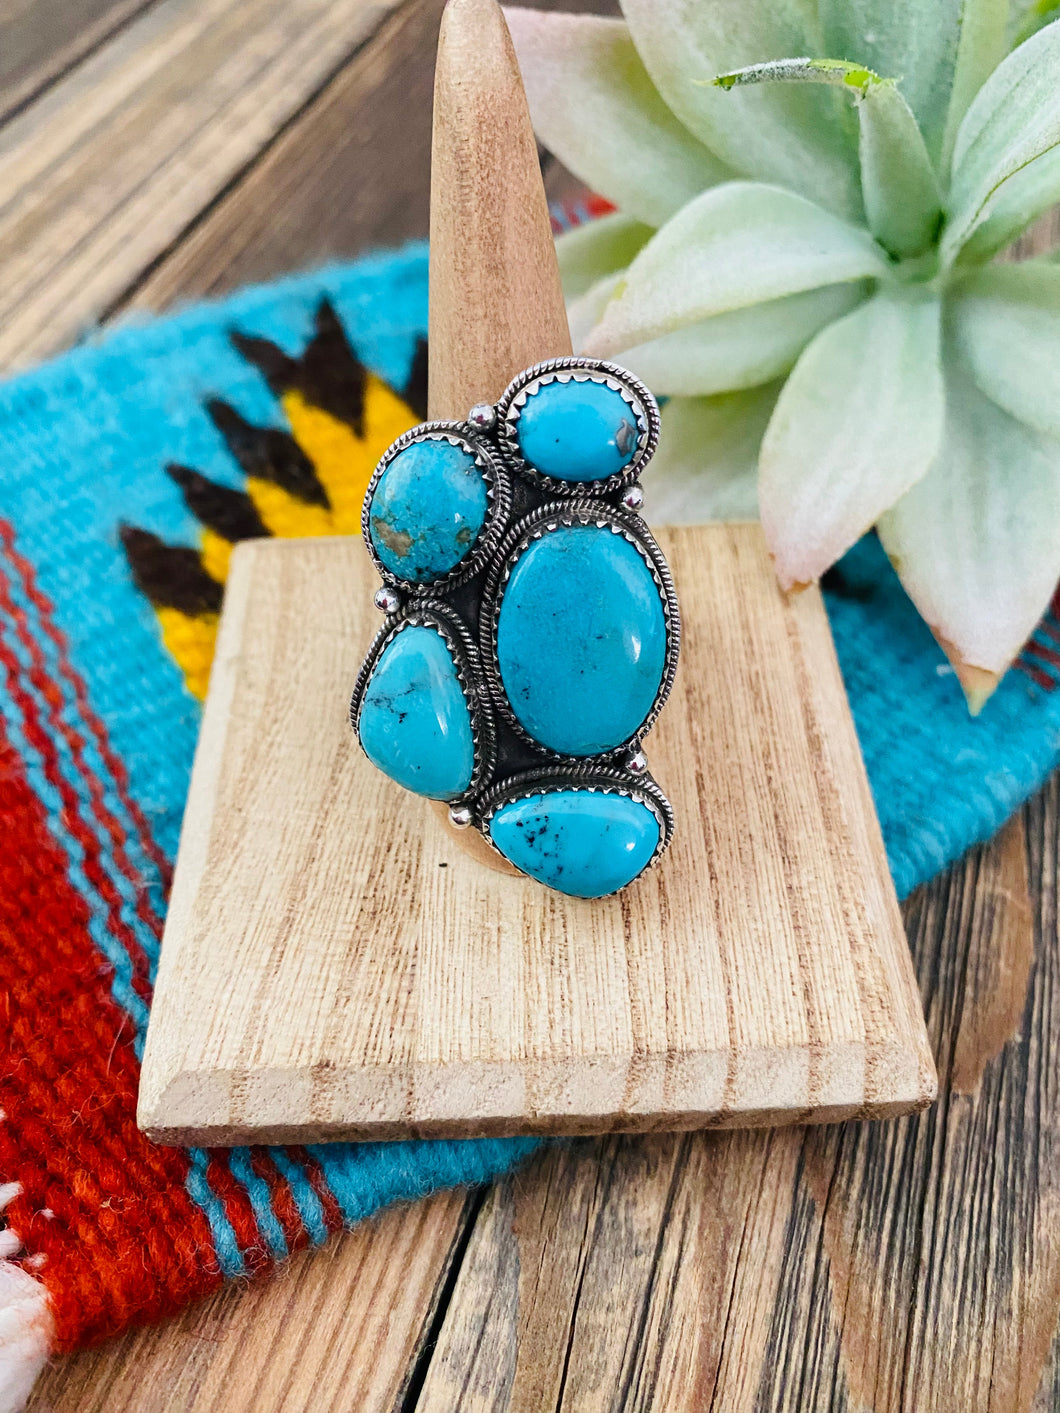 Handmade Sterling Silver & Turquoise Cluster Adjustable Ring